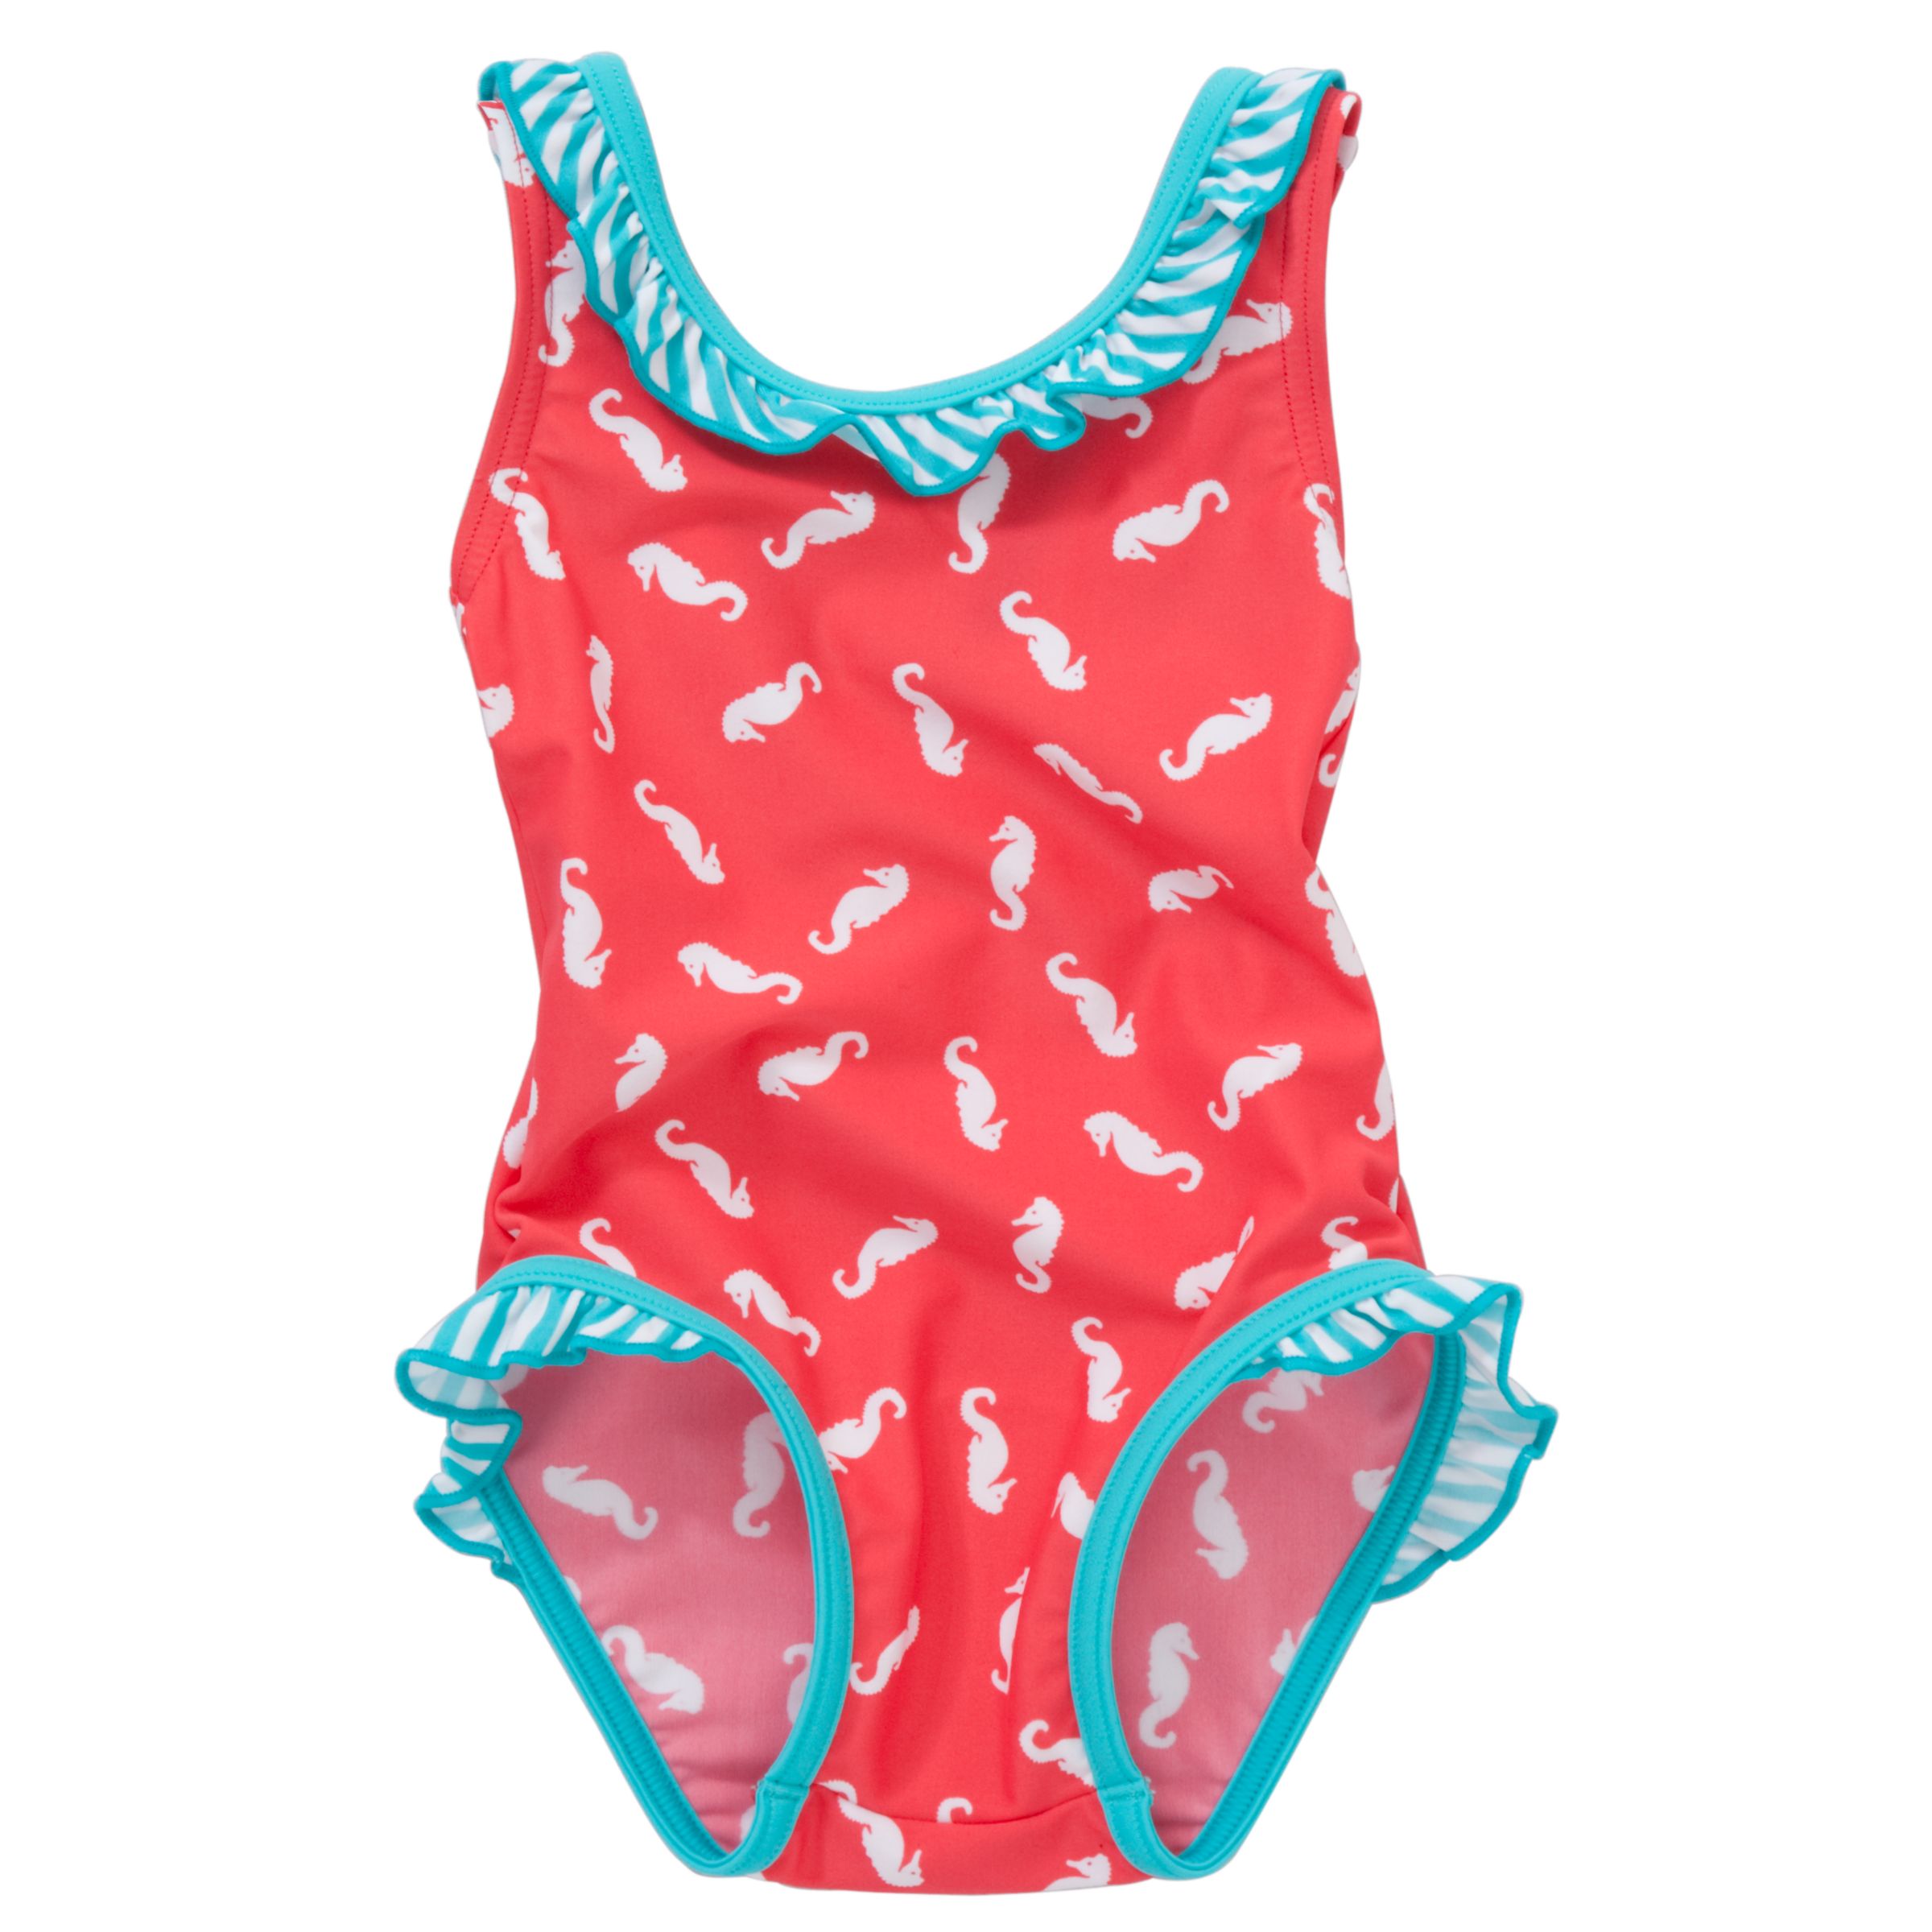 Seahorse Print Swimsuit, Red